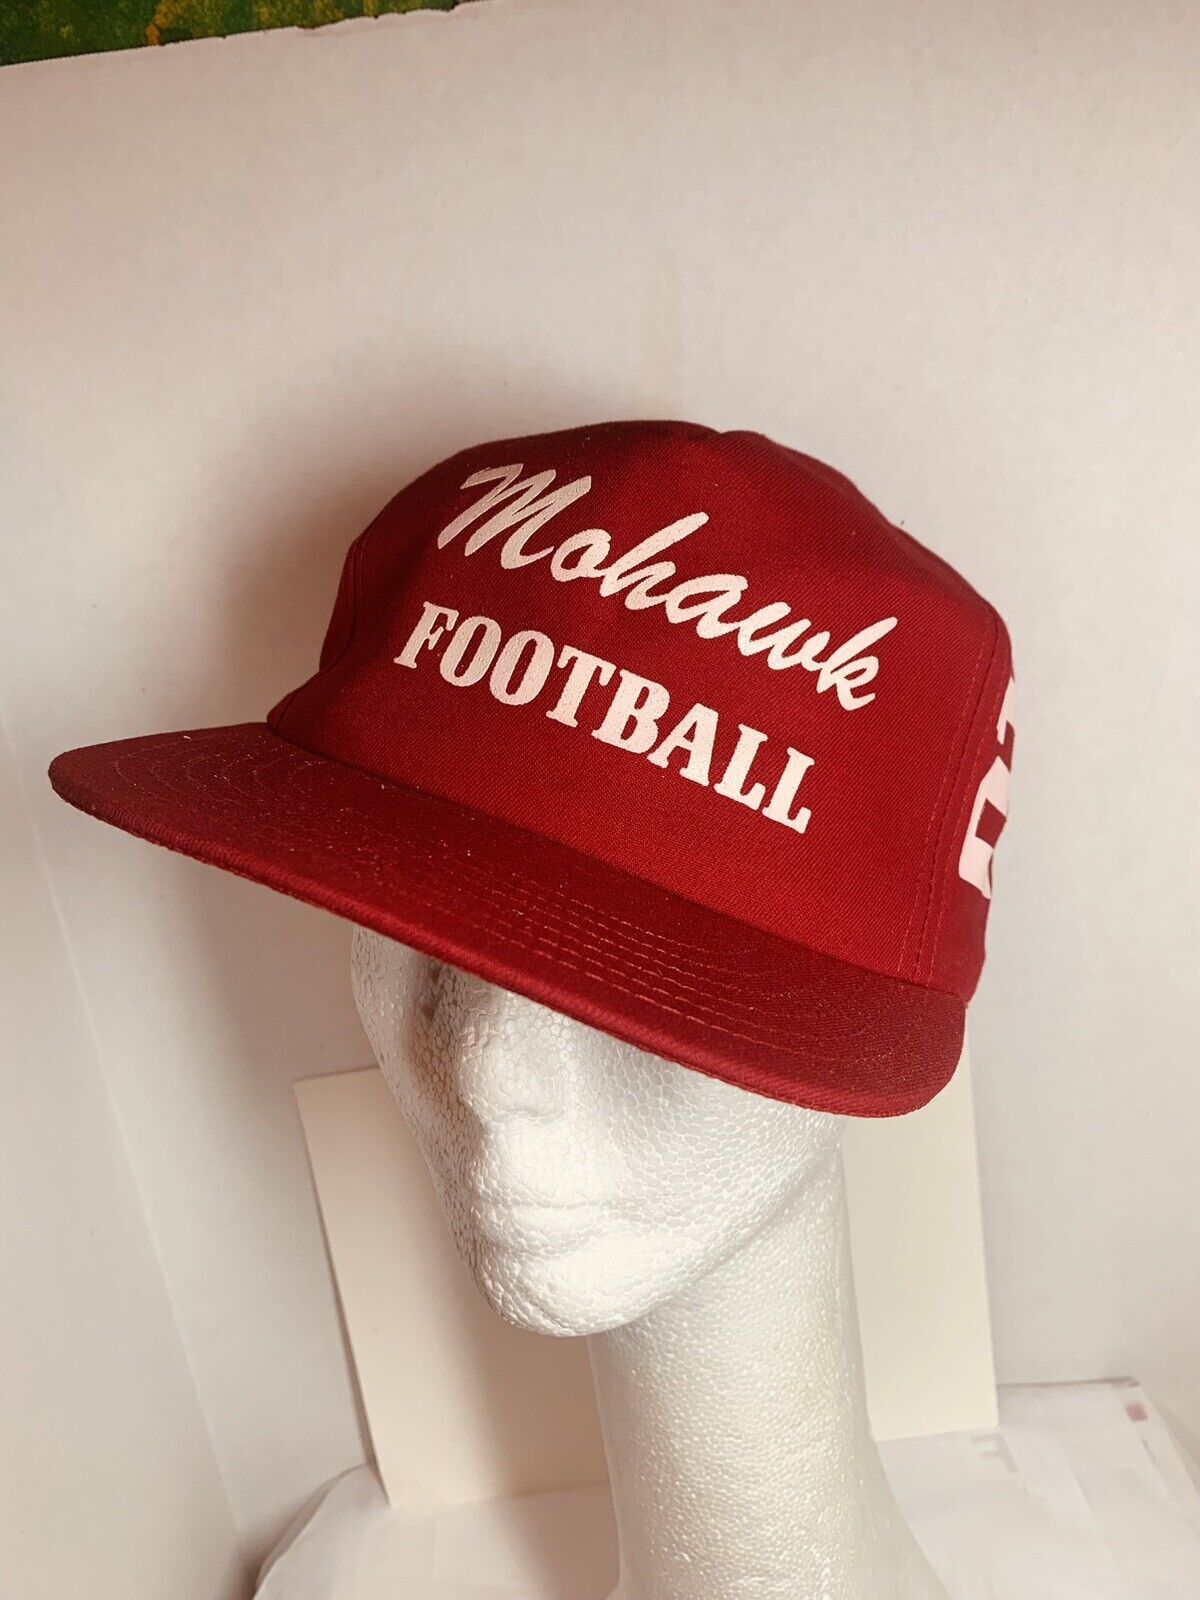 Primary image for Mohawk Football Red 21 Cap SnapBack Vinyl or Screen printed  USA GUC